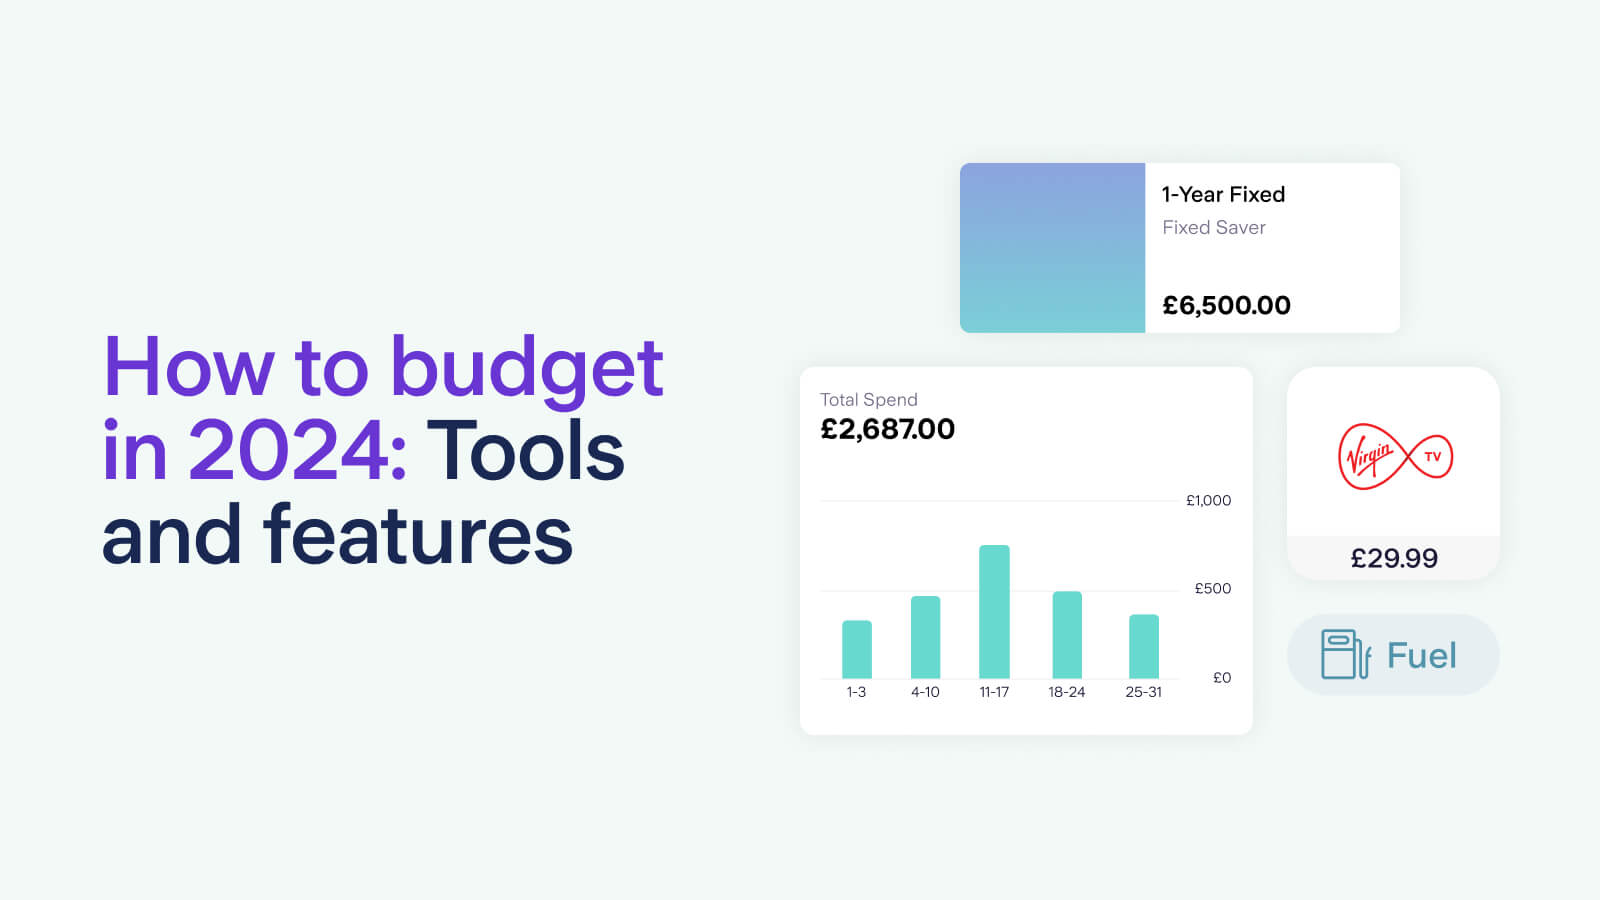 How to budget in 2024: Tools and features